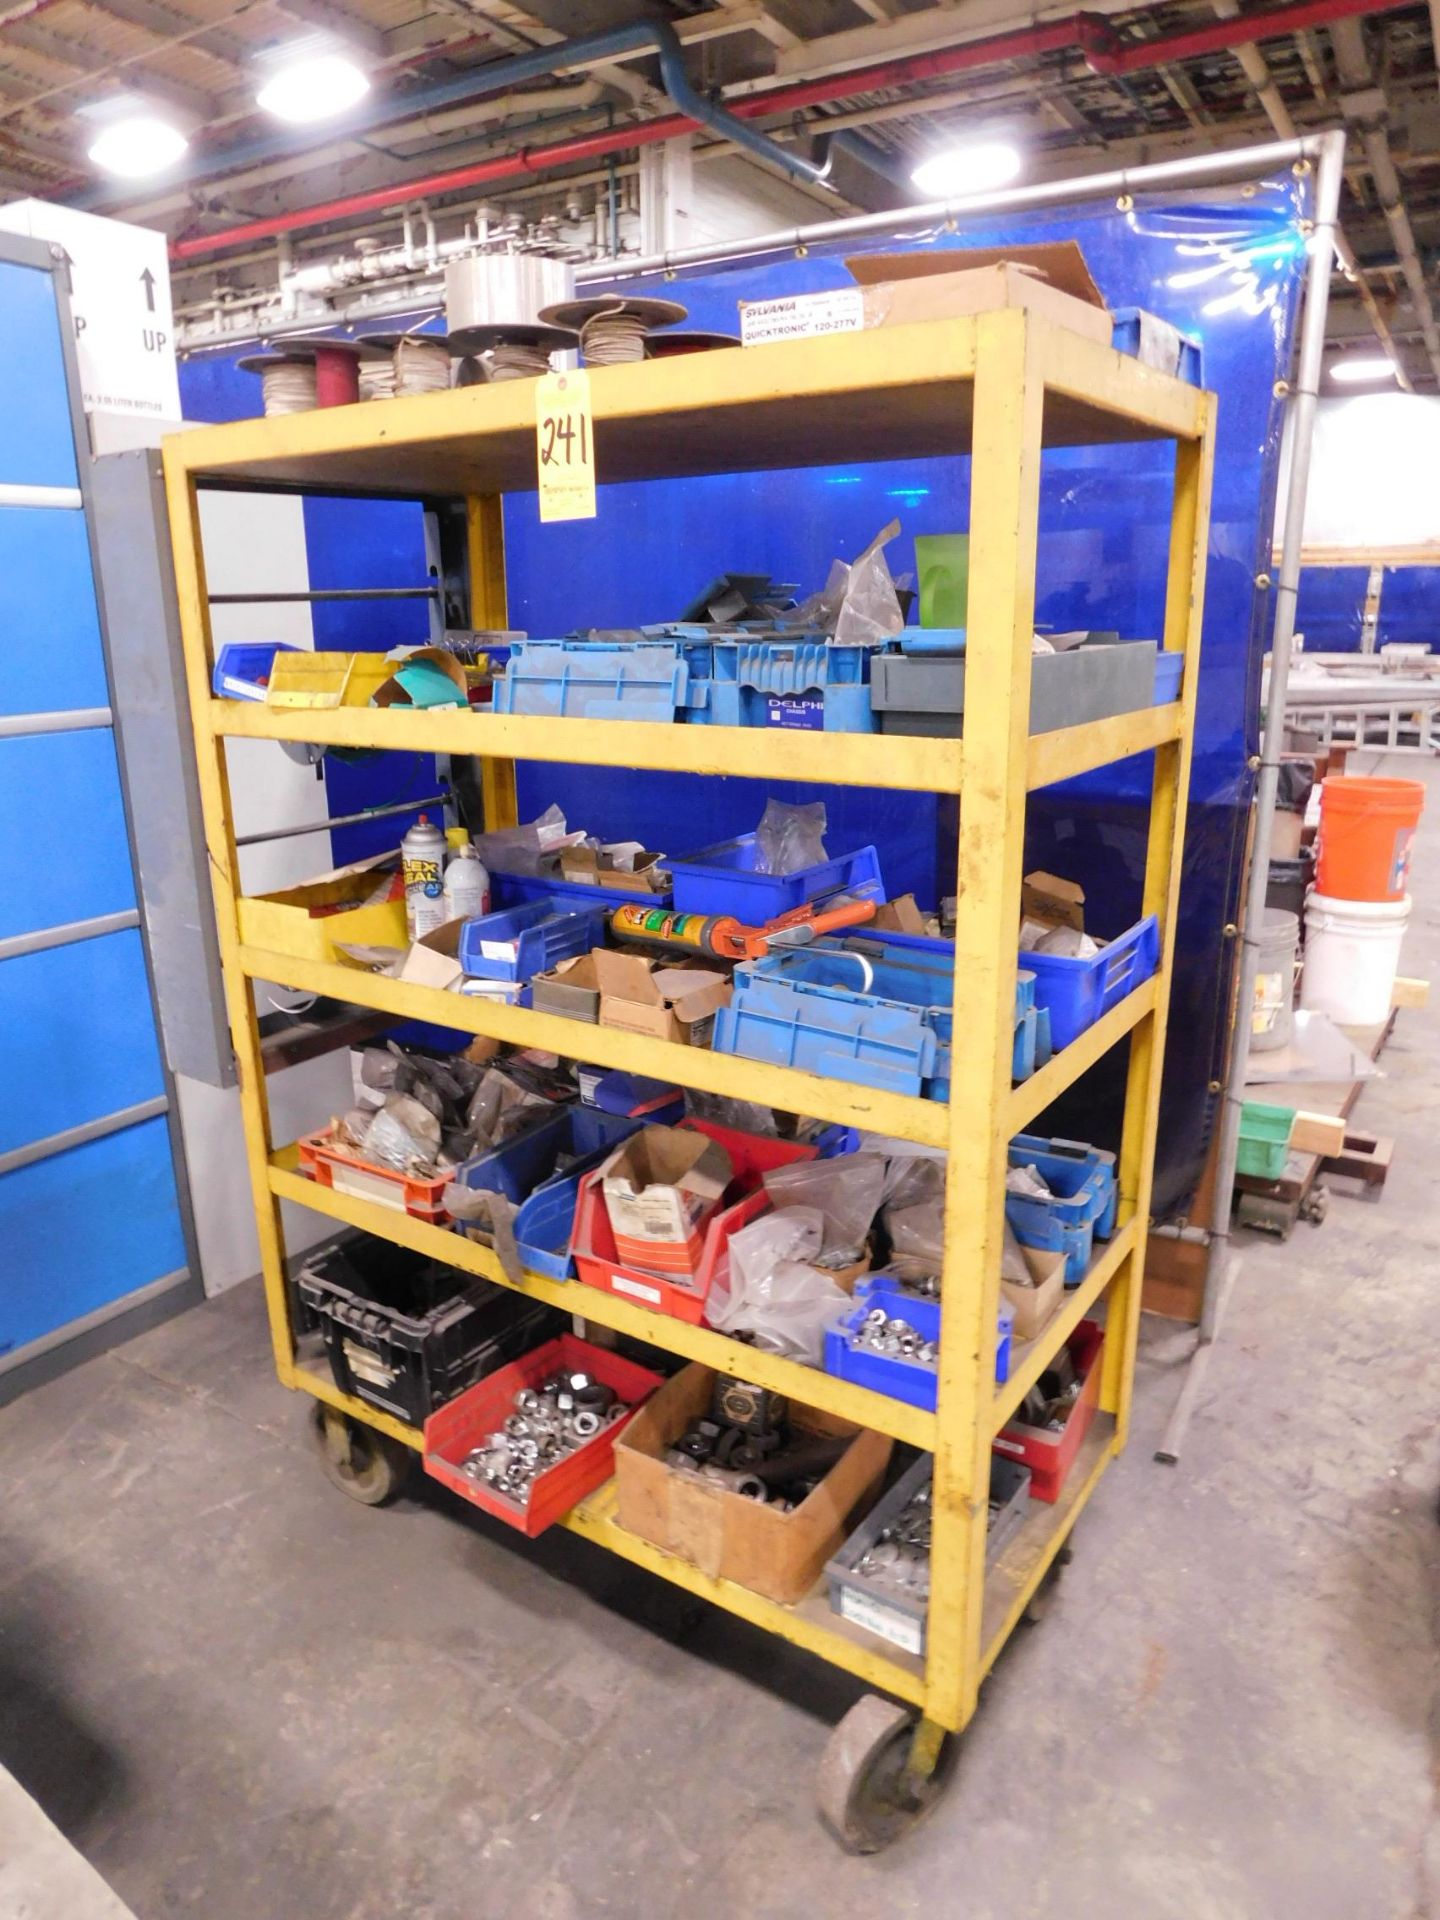 5-Tier Shop Cart and Contents